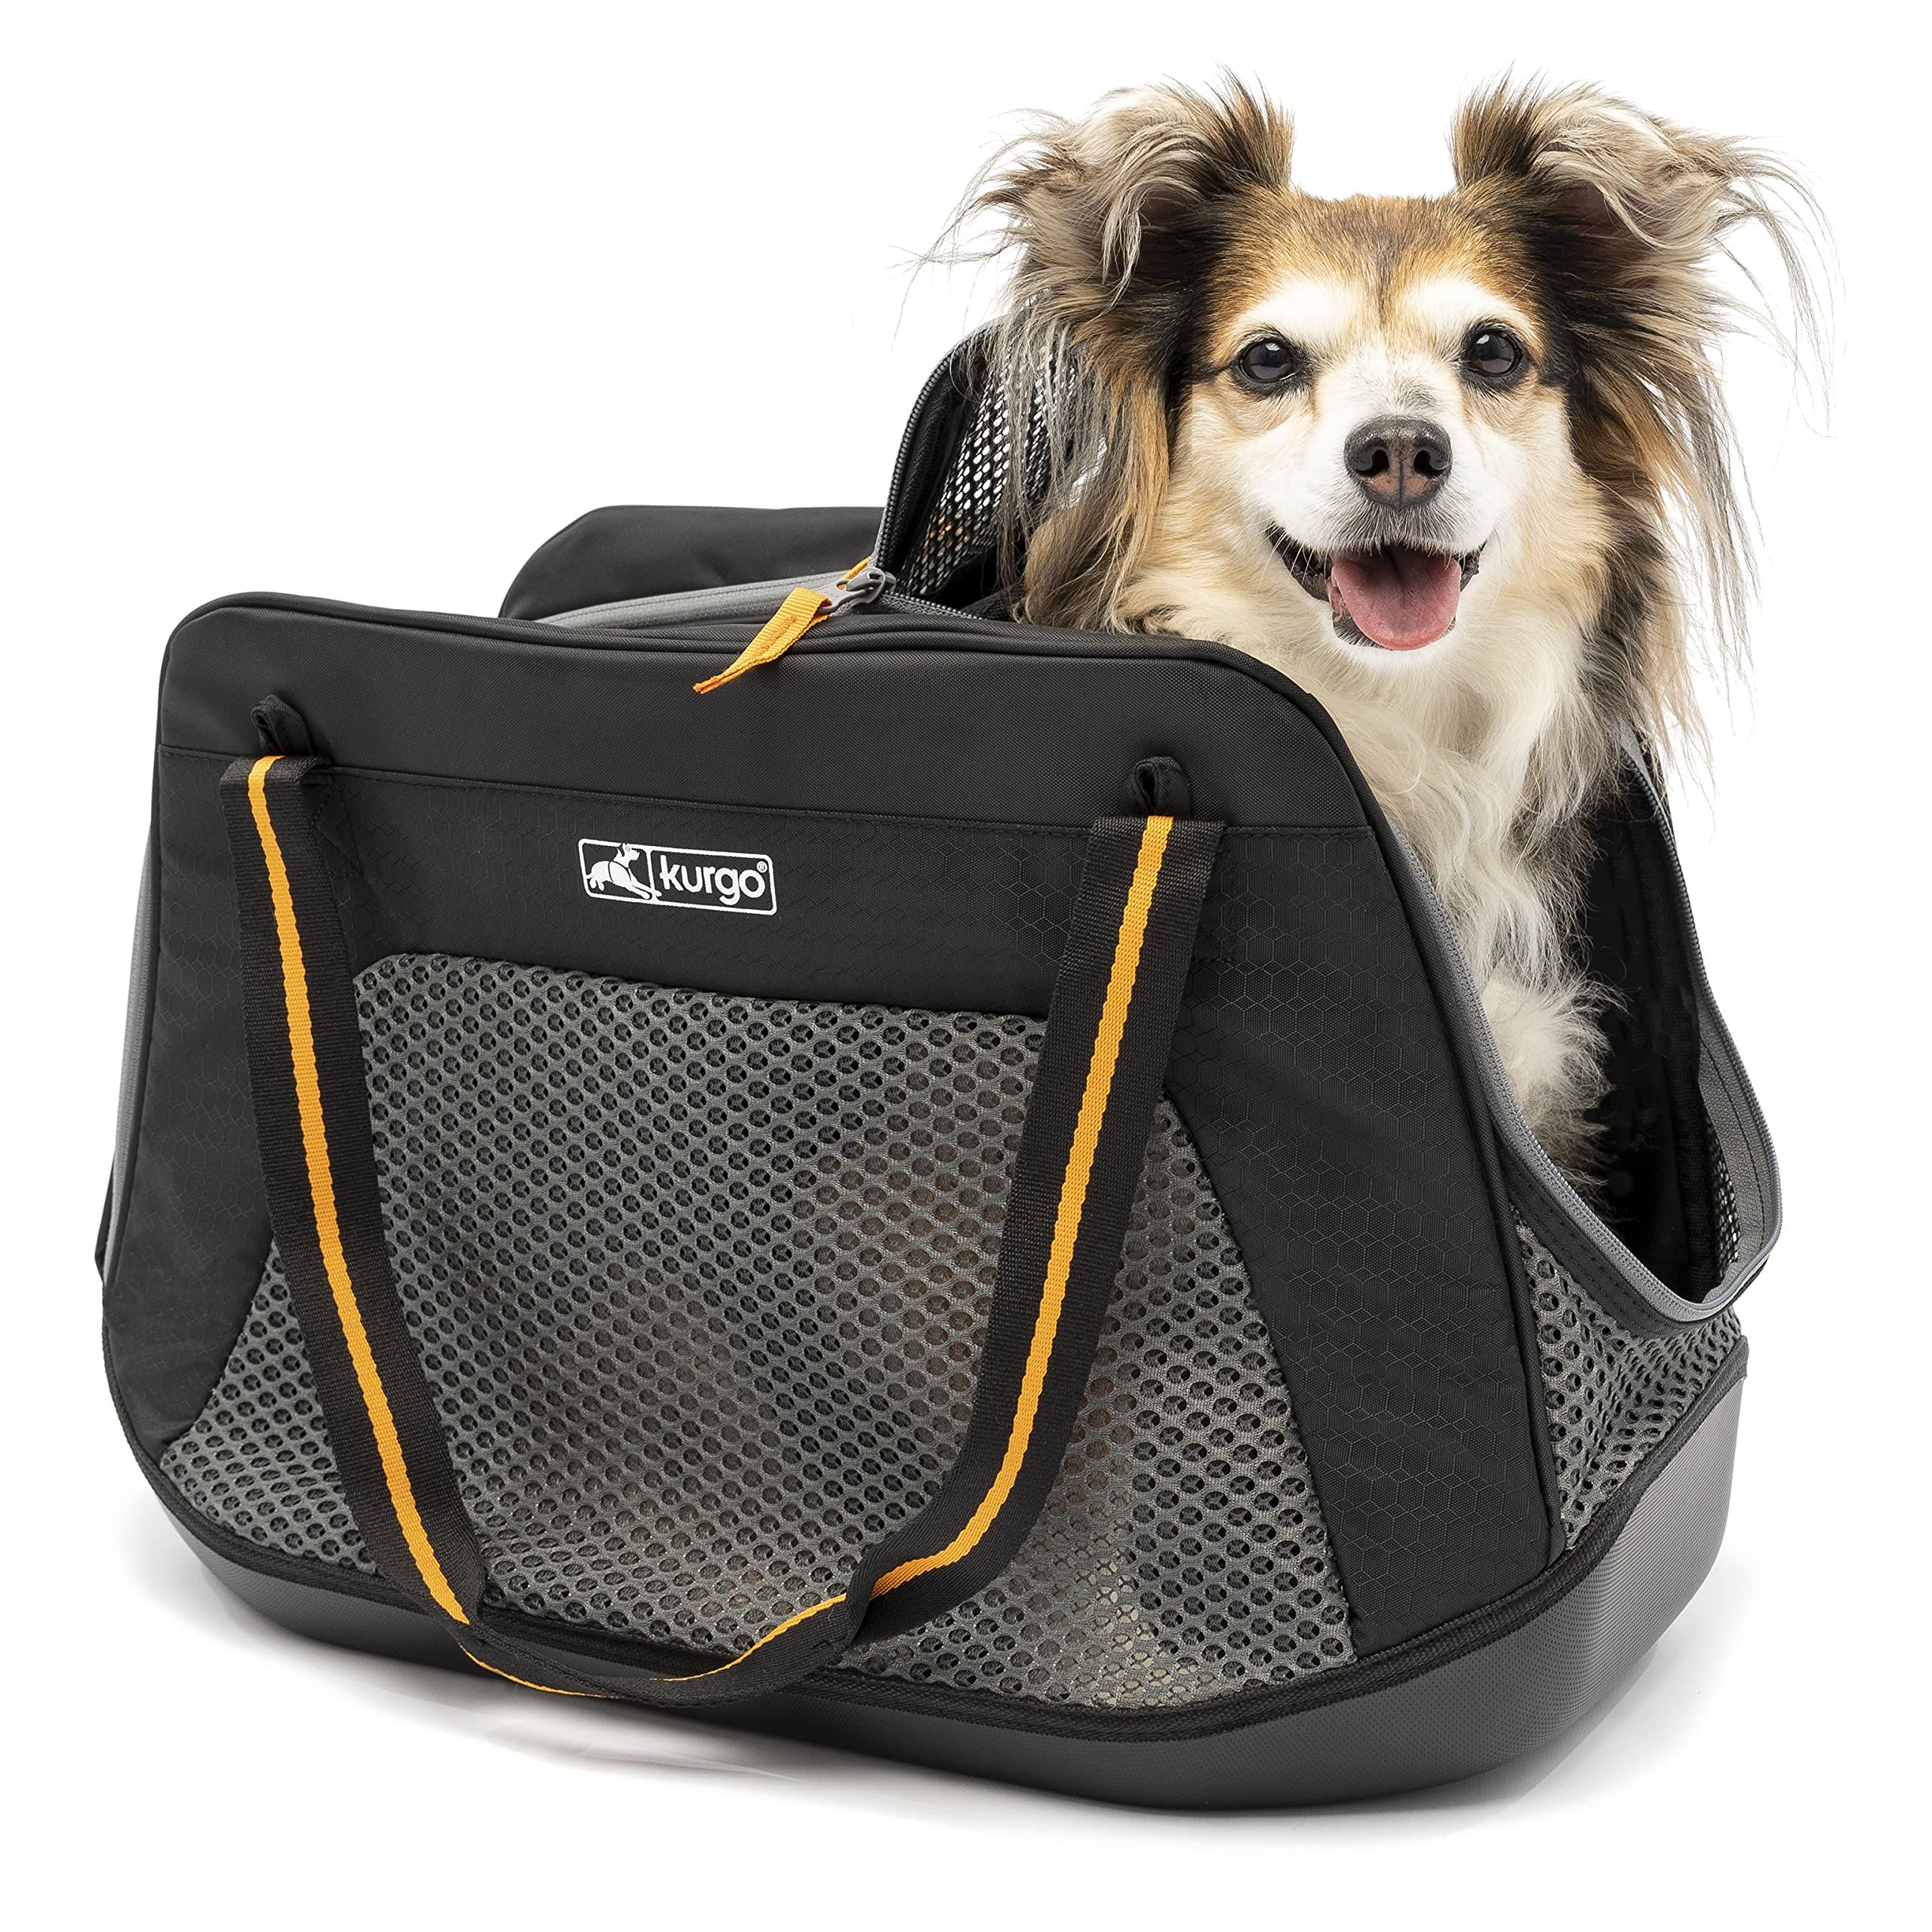 Kurgo Explorer Dog Carrier, Soft Sided Pet Carrier Bag, Duffle Bag Carrier for Dogs, Water-Resistant, Airline Compliant, Wander, Metro, & Explorer Carriers, for Cats & Small Dogs